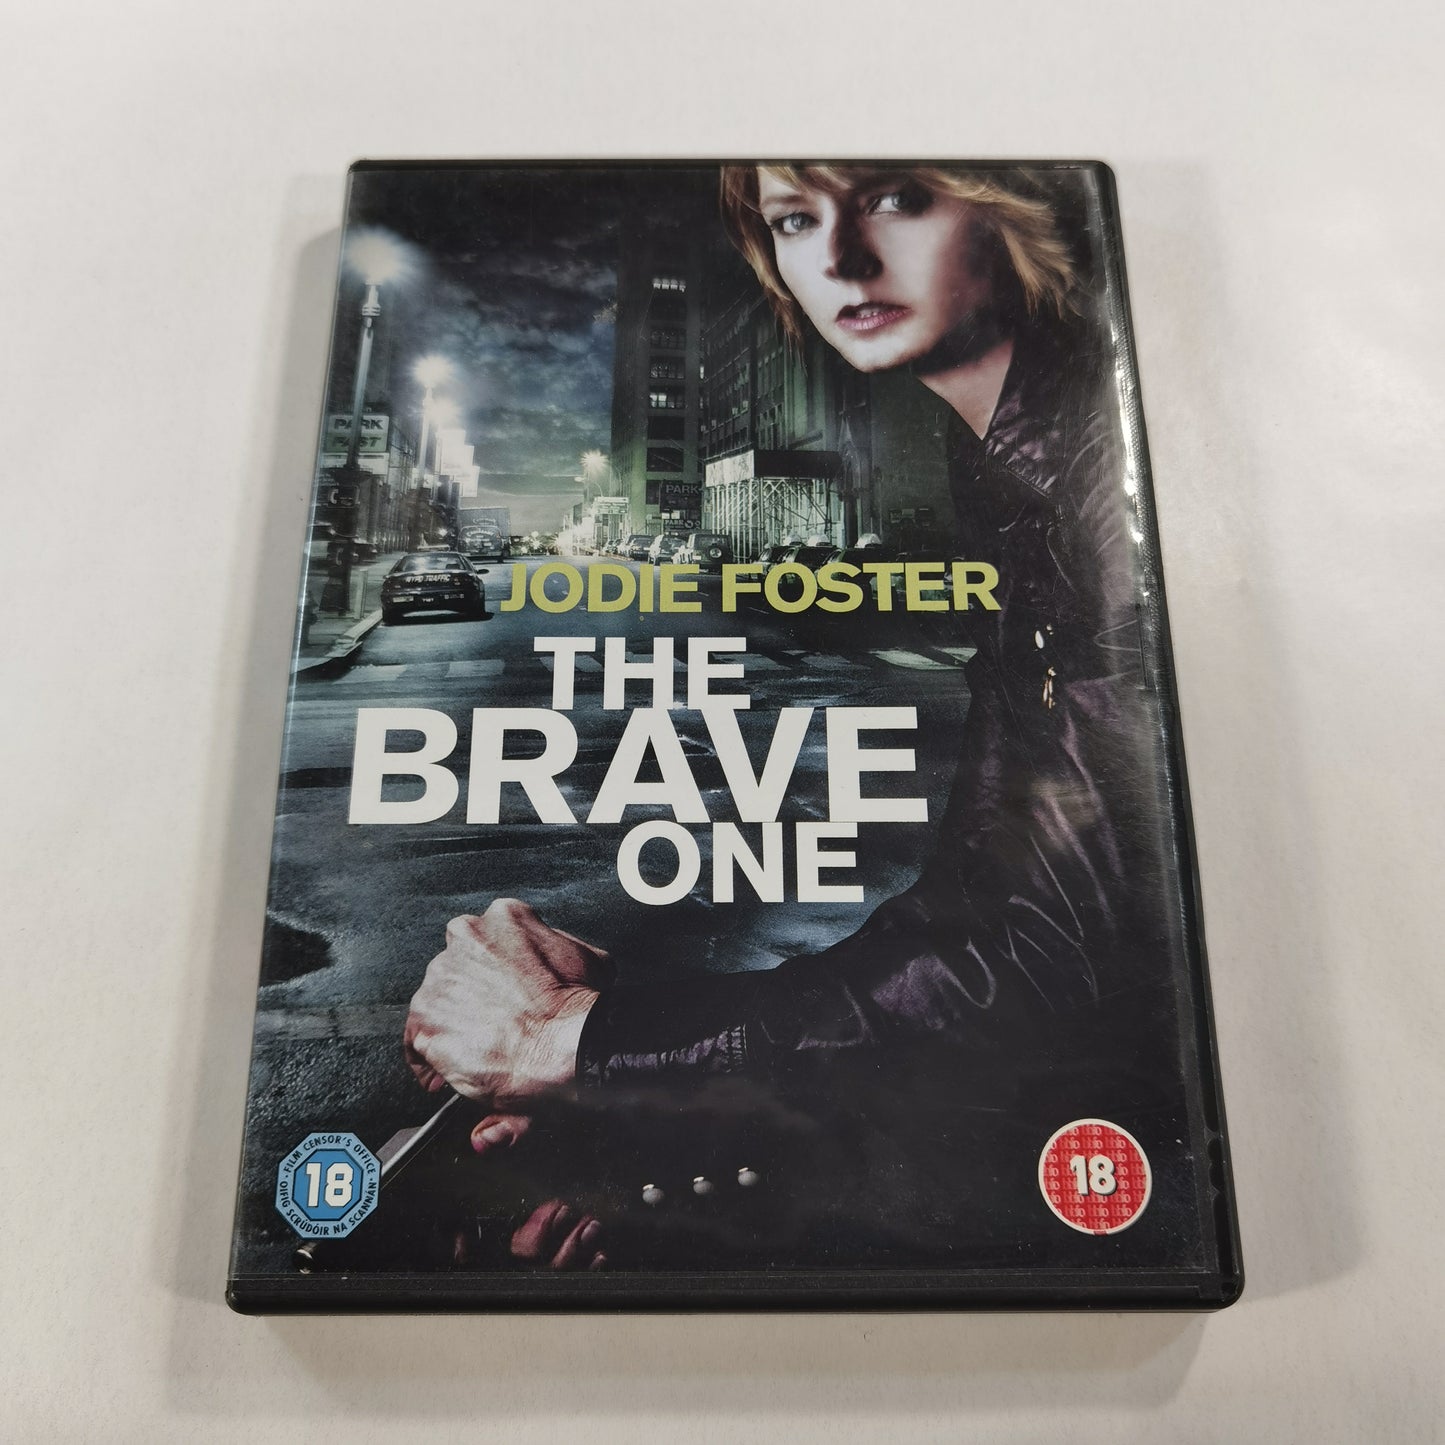 The Brave One Film Locations - [www.]